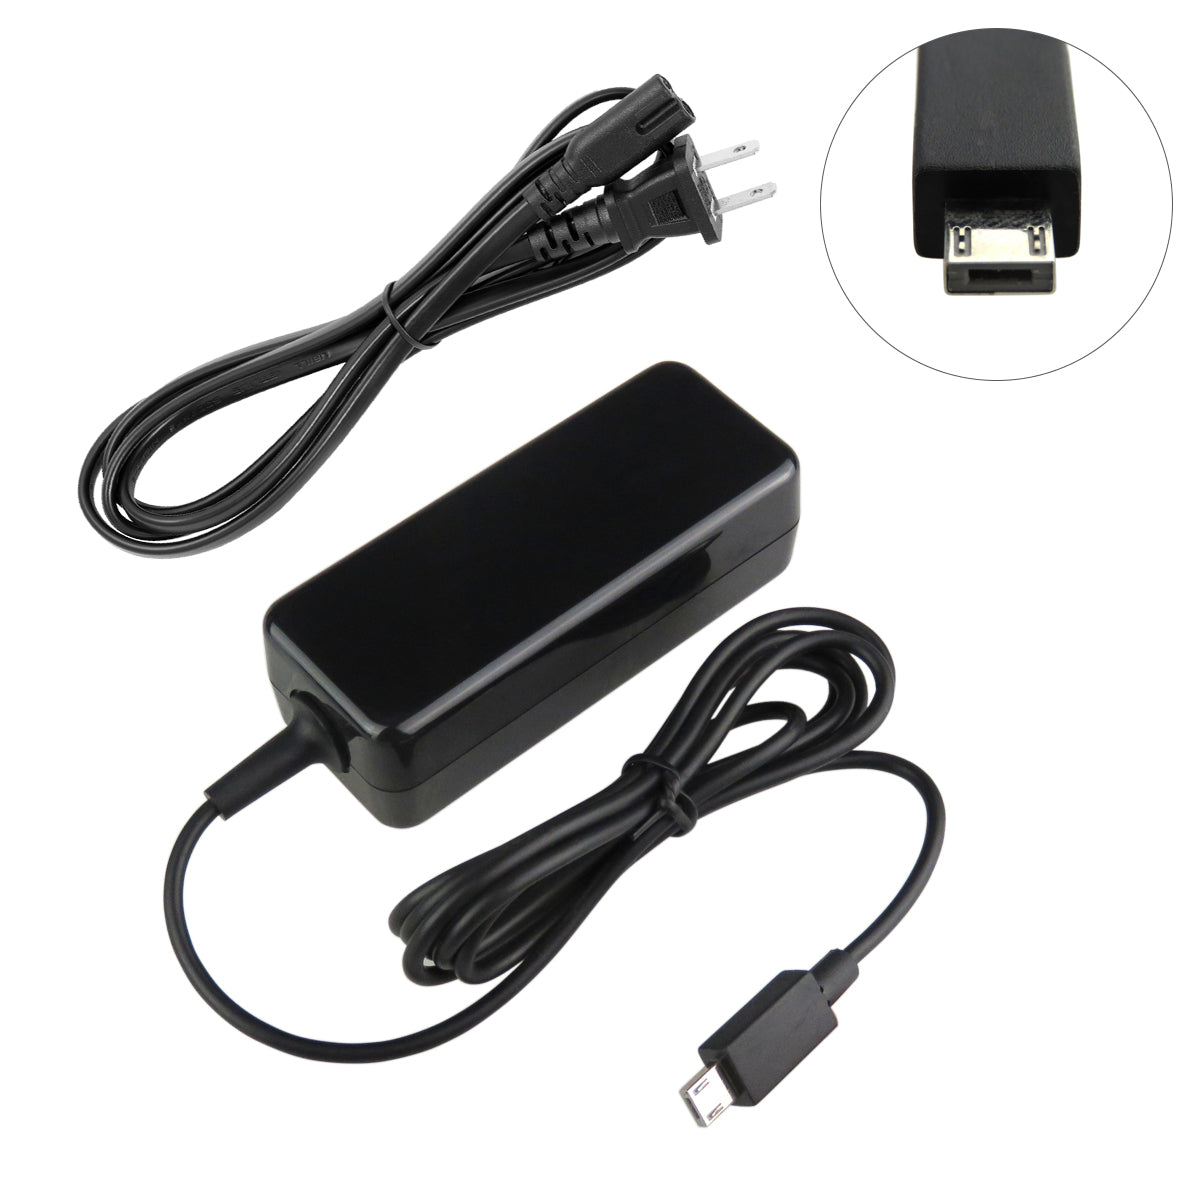 Charger for ASUS EeeBook E202SA-FD0003T Laptop.